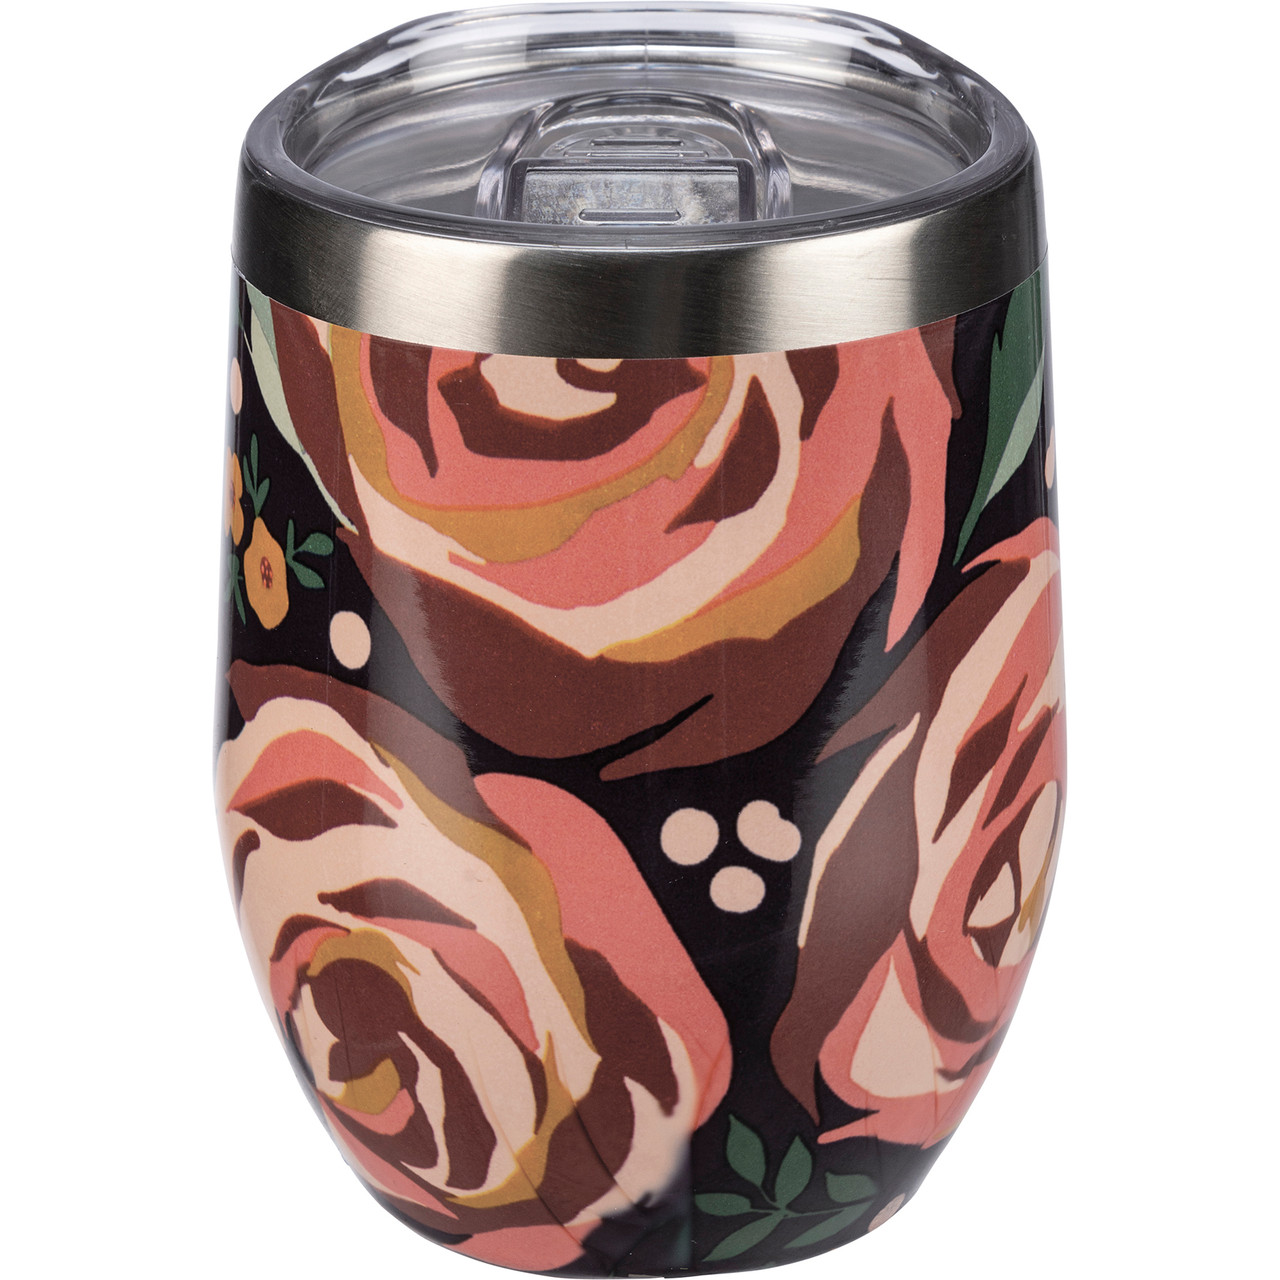 Wrap Around Sunflower Design Stainless Steel Coffee Tumbler Thermos 20 Oz  from Primitives by Kathy - Cherryland Sales